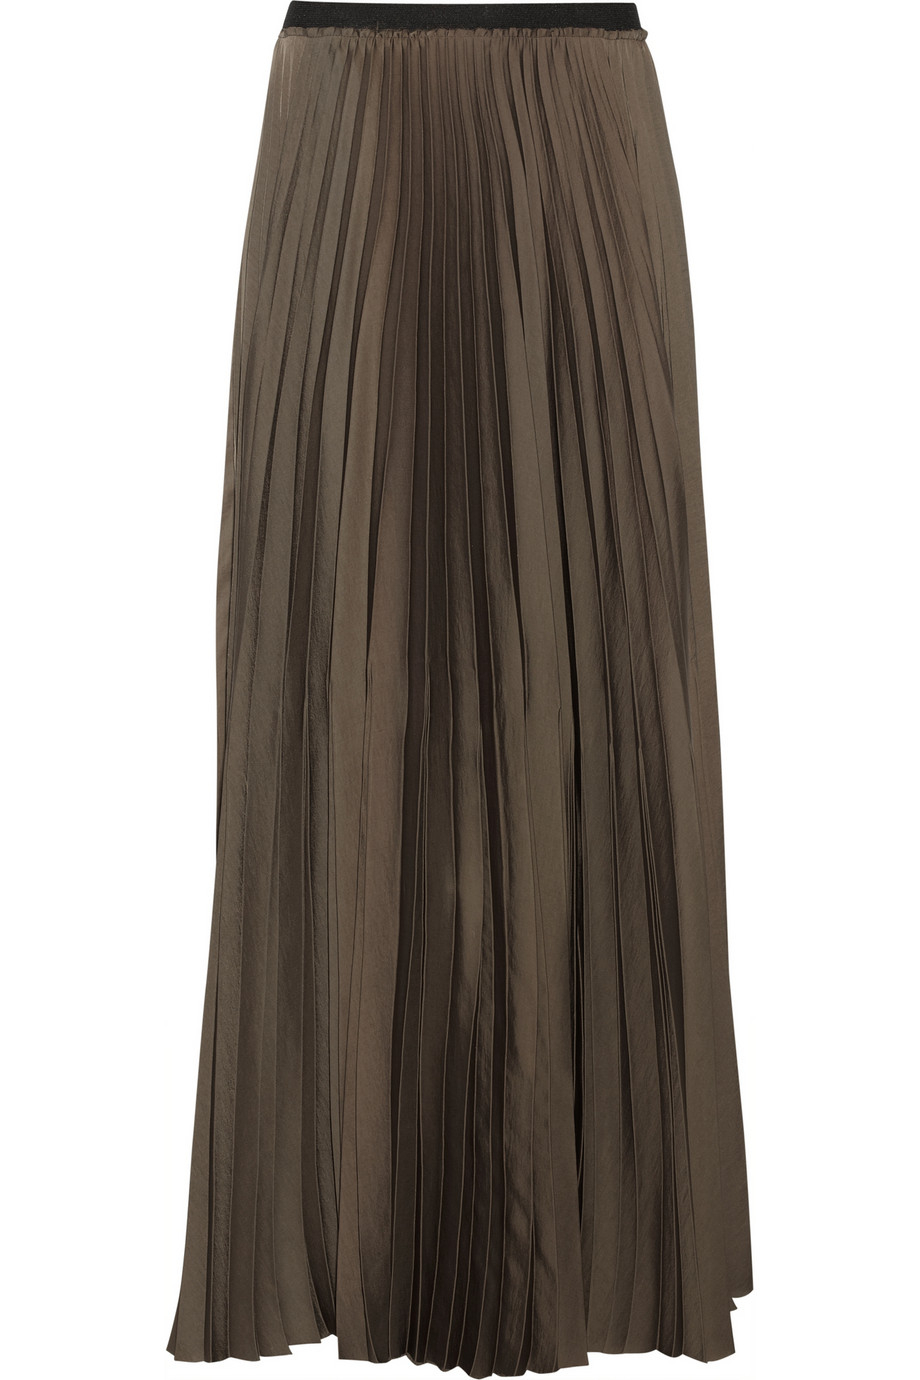 Enza Costa Pleated Satin Maxi Skirt in Army Green (Green) - Lyst